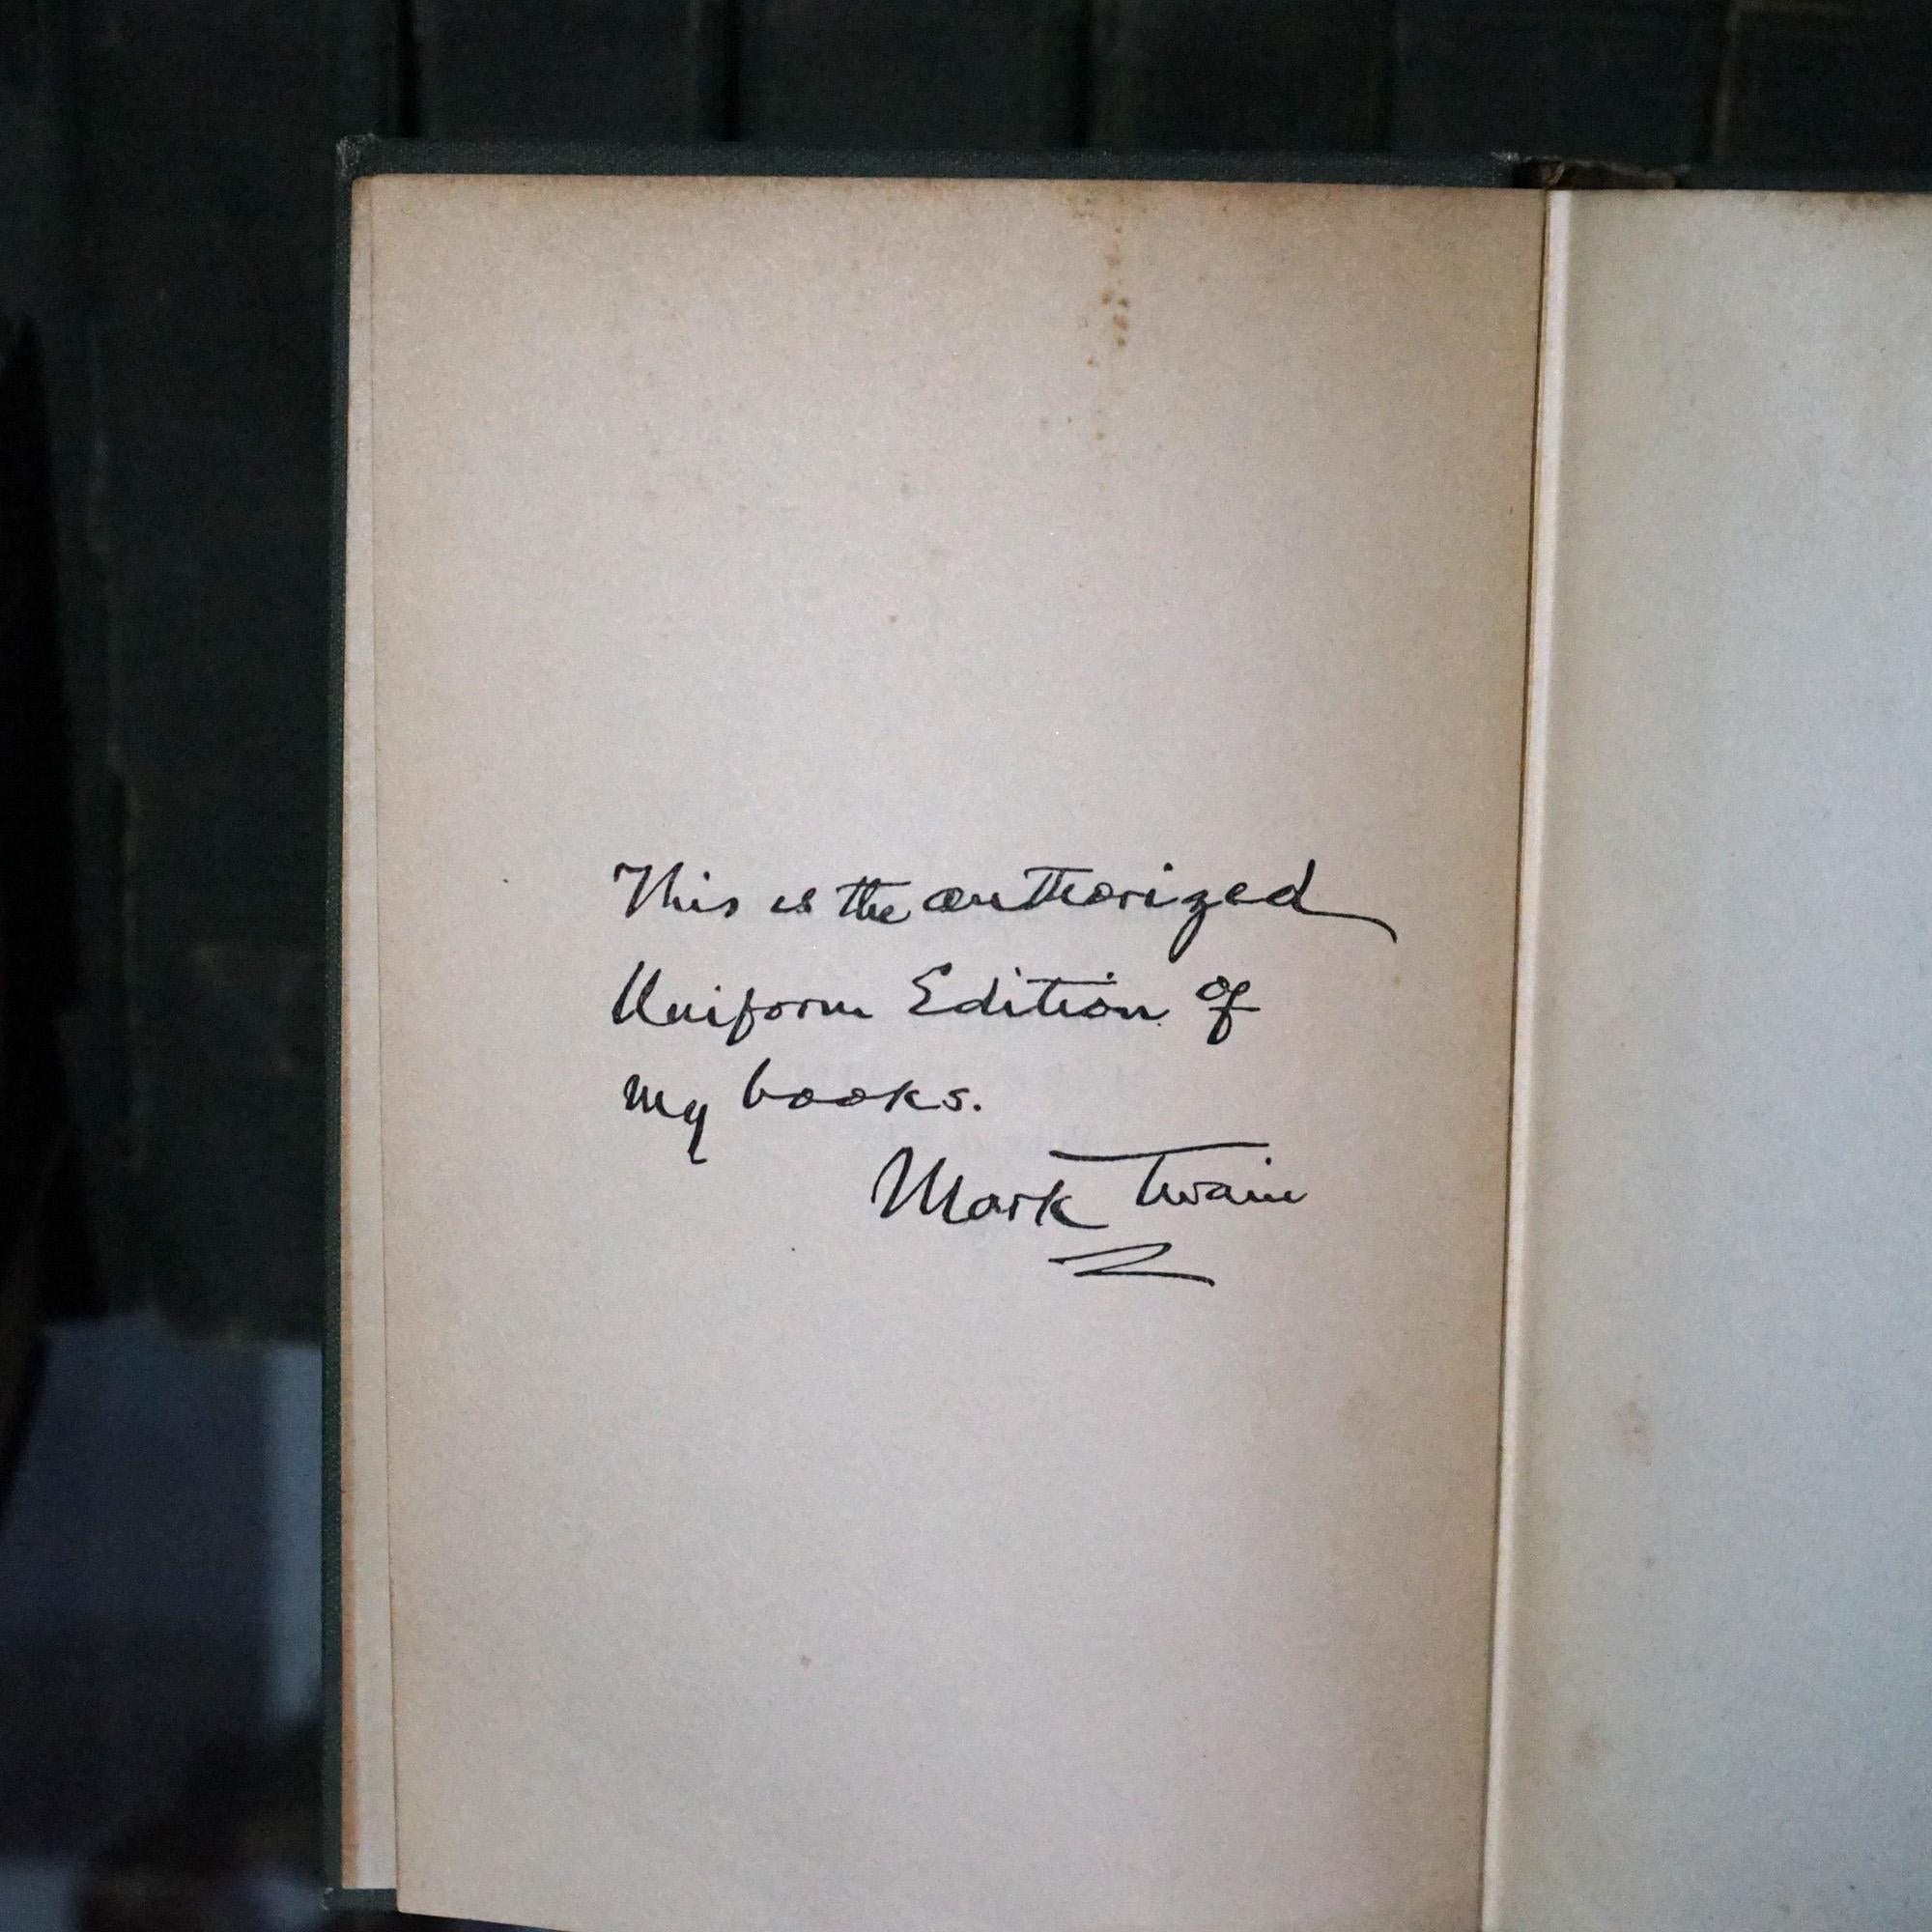 An antique 27-volume set of Authorized Uniform Edition series of books by Mark Twain Books, author signed, c1899
Bio (By Paine): 3,6,13,14,19  
Volumes: 1,2,2,3,4,5,7,8,9,10,11,15,16,17,1820,21,22,23,24,25 

Measures - 8